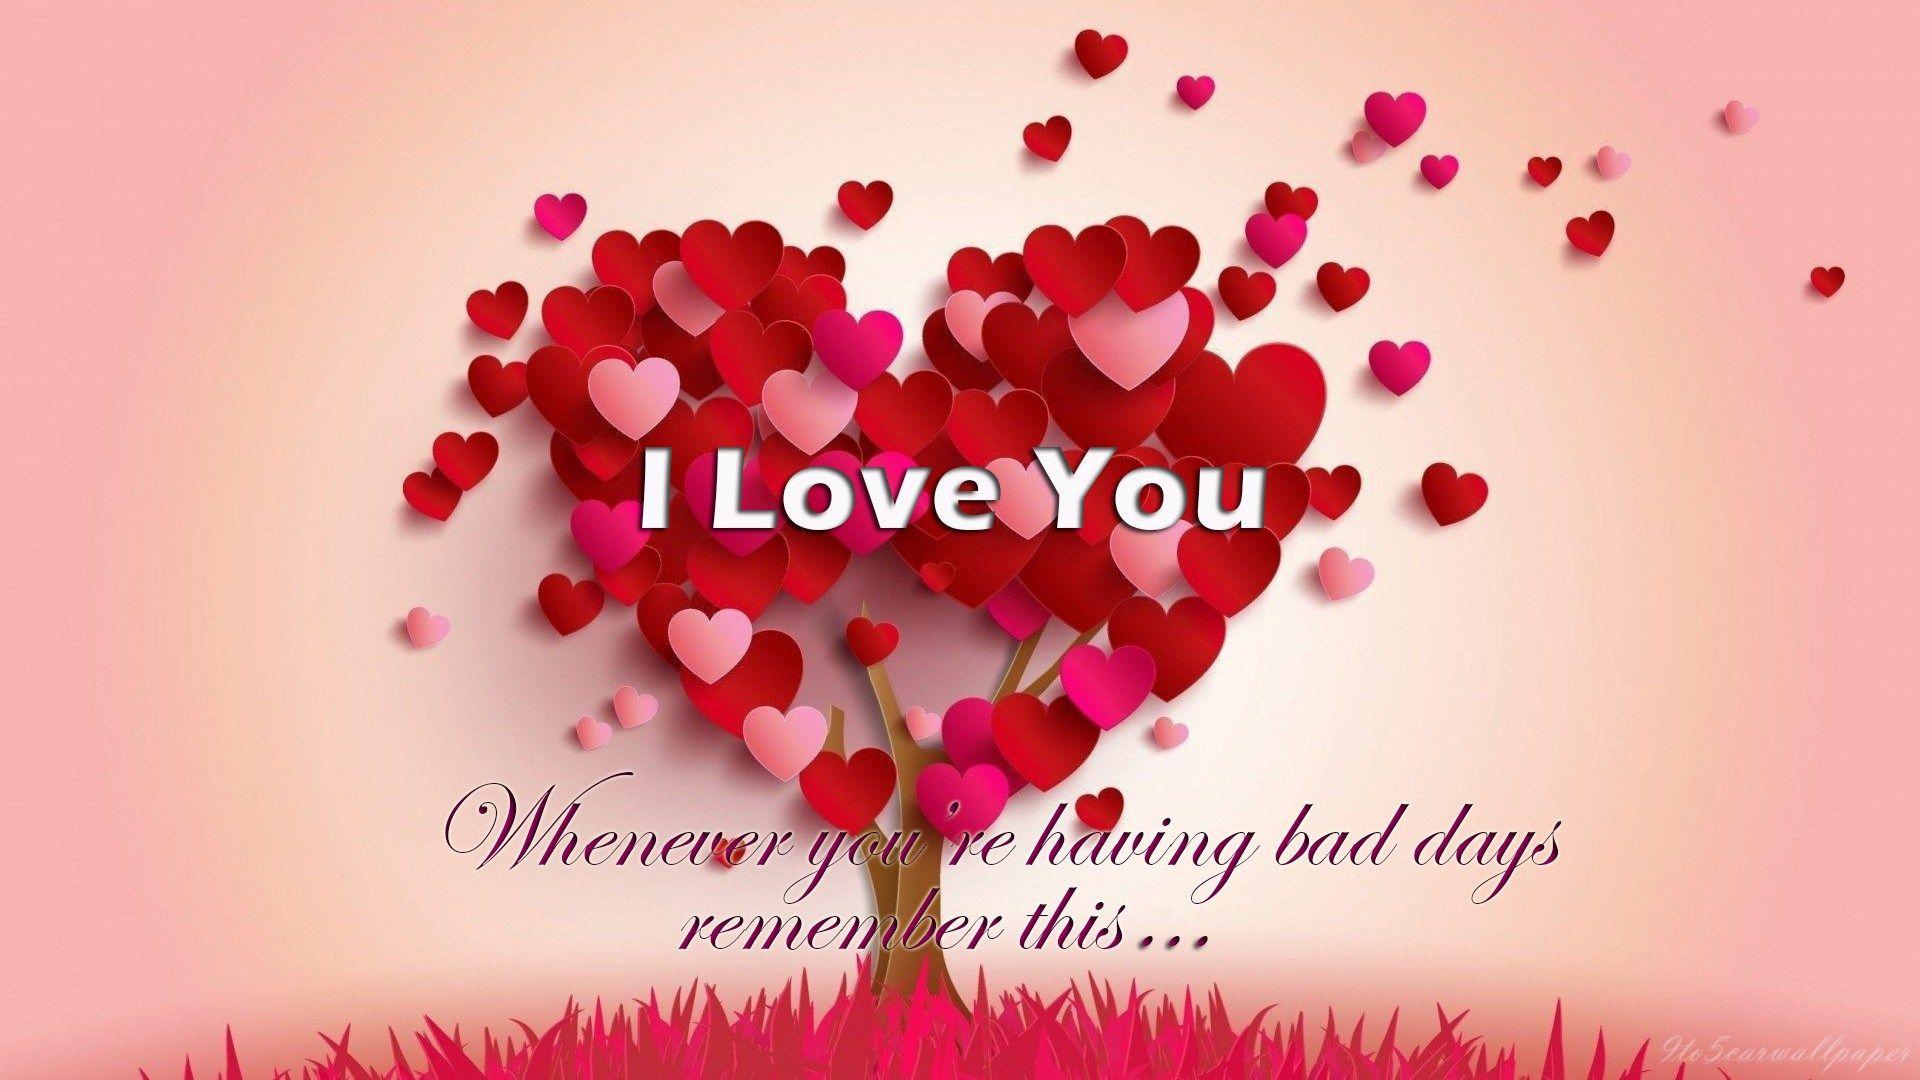 I Love You Quotes Image For Him World Events